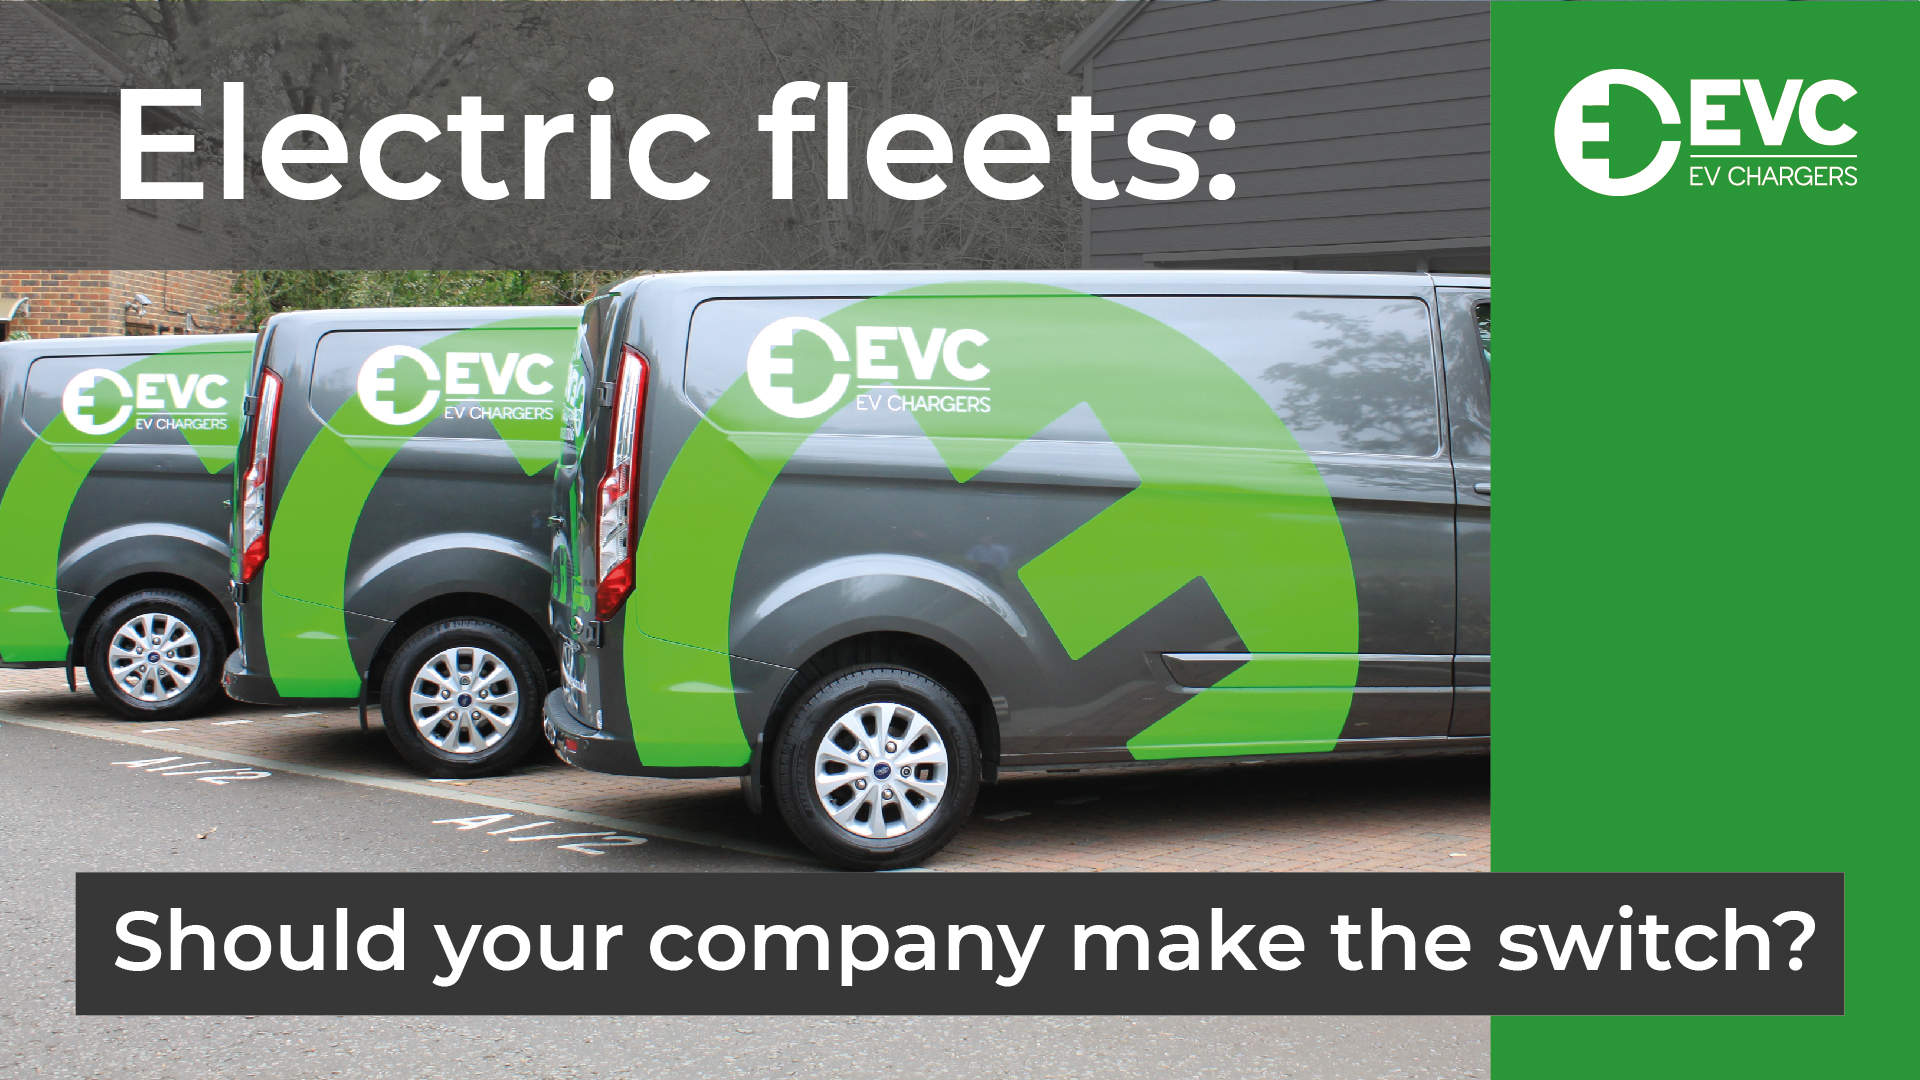 Electric fleets: Should your company make the switch?